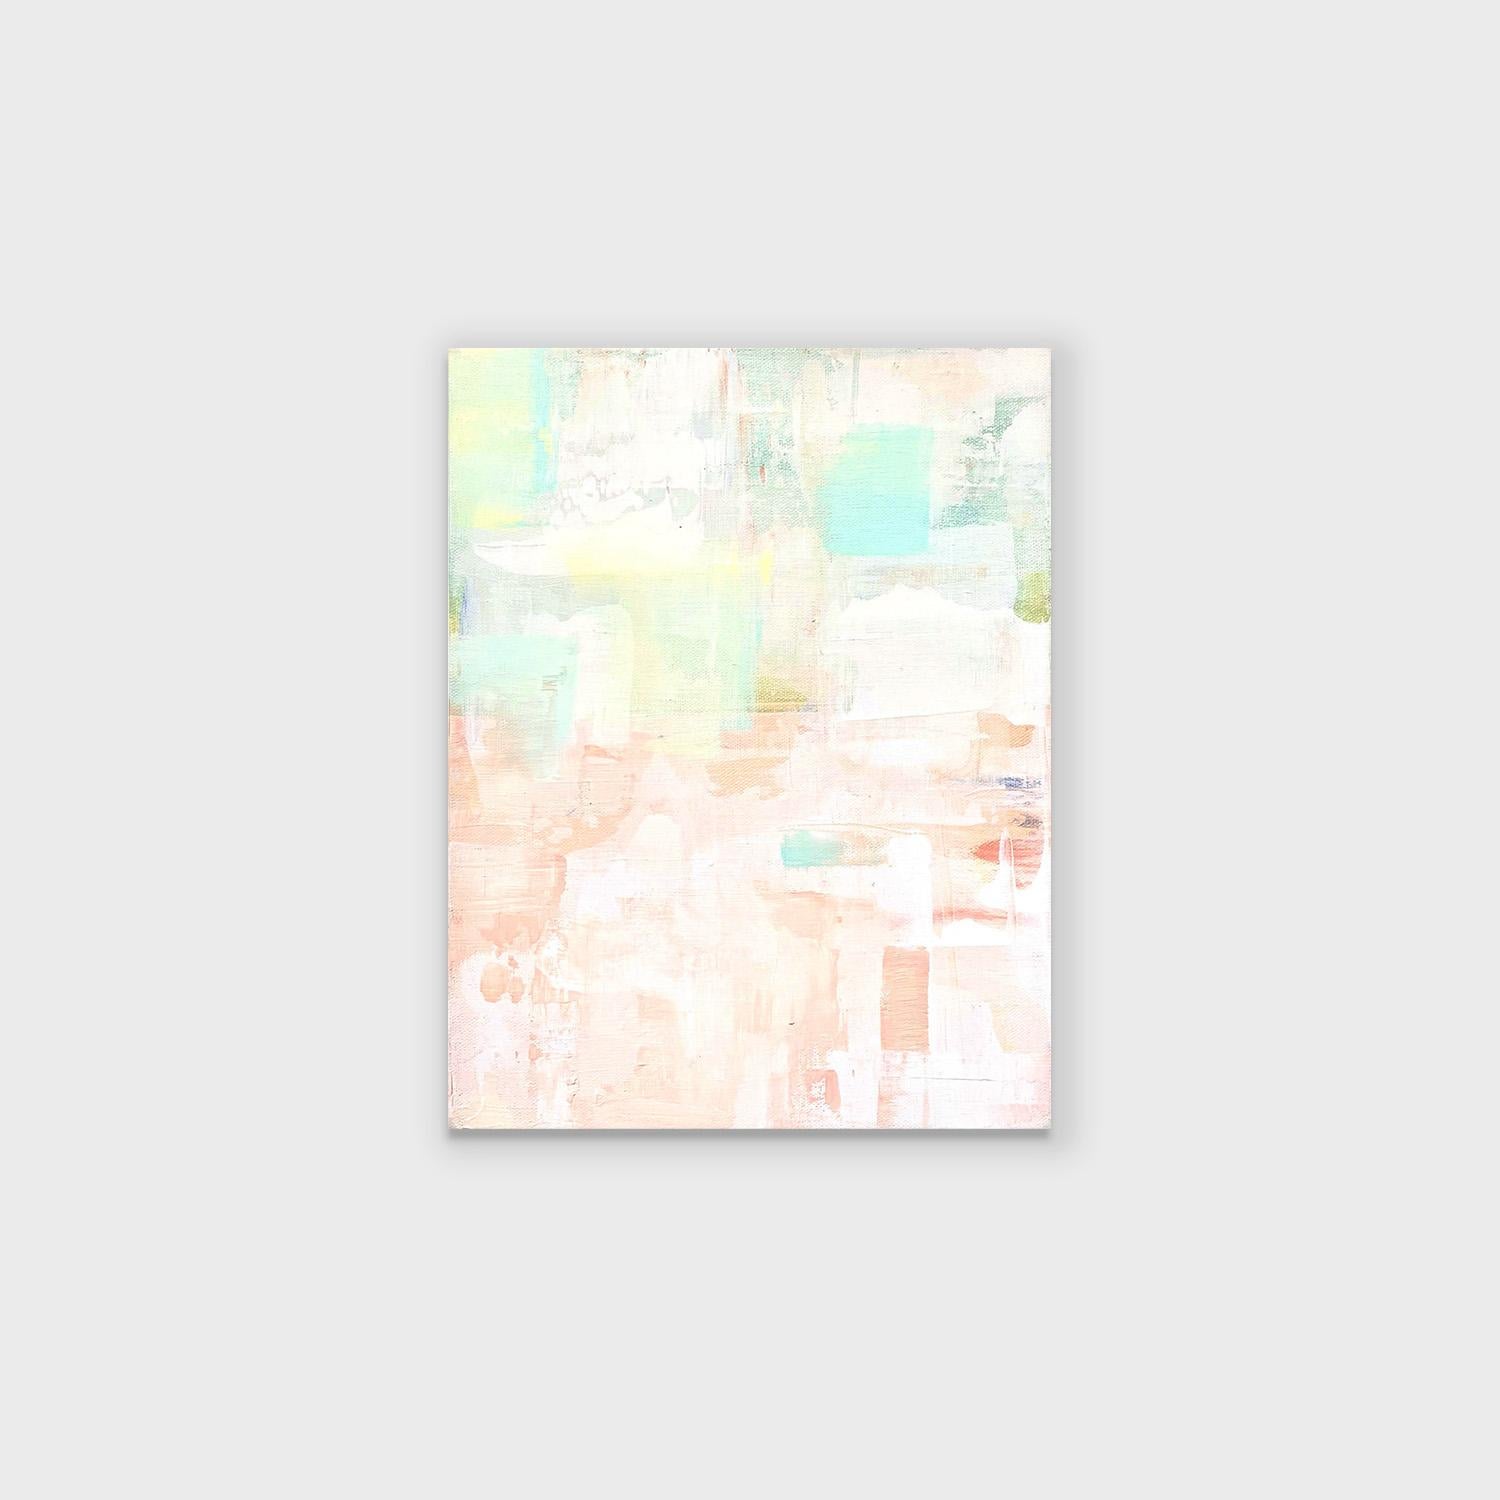 Stefanie Bales Abstract Painting - An Abstract Acrylic on Canvas Painting, "Sea Glass"